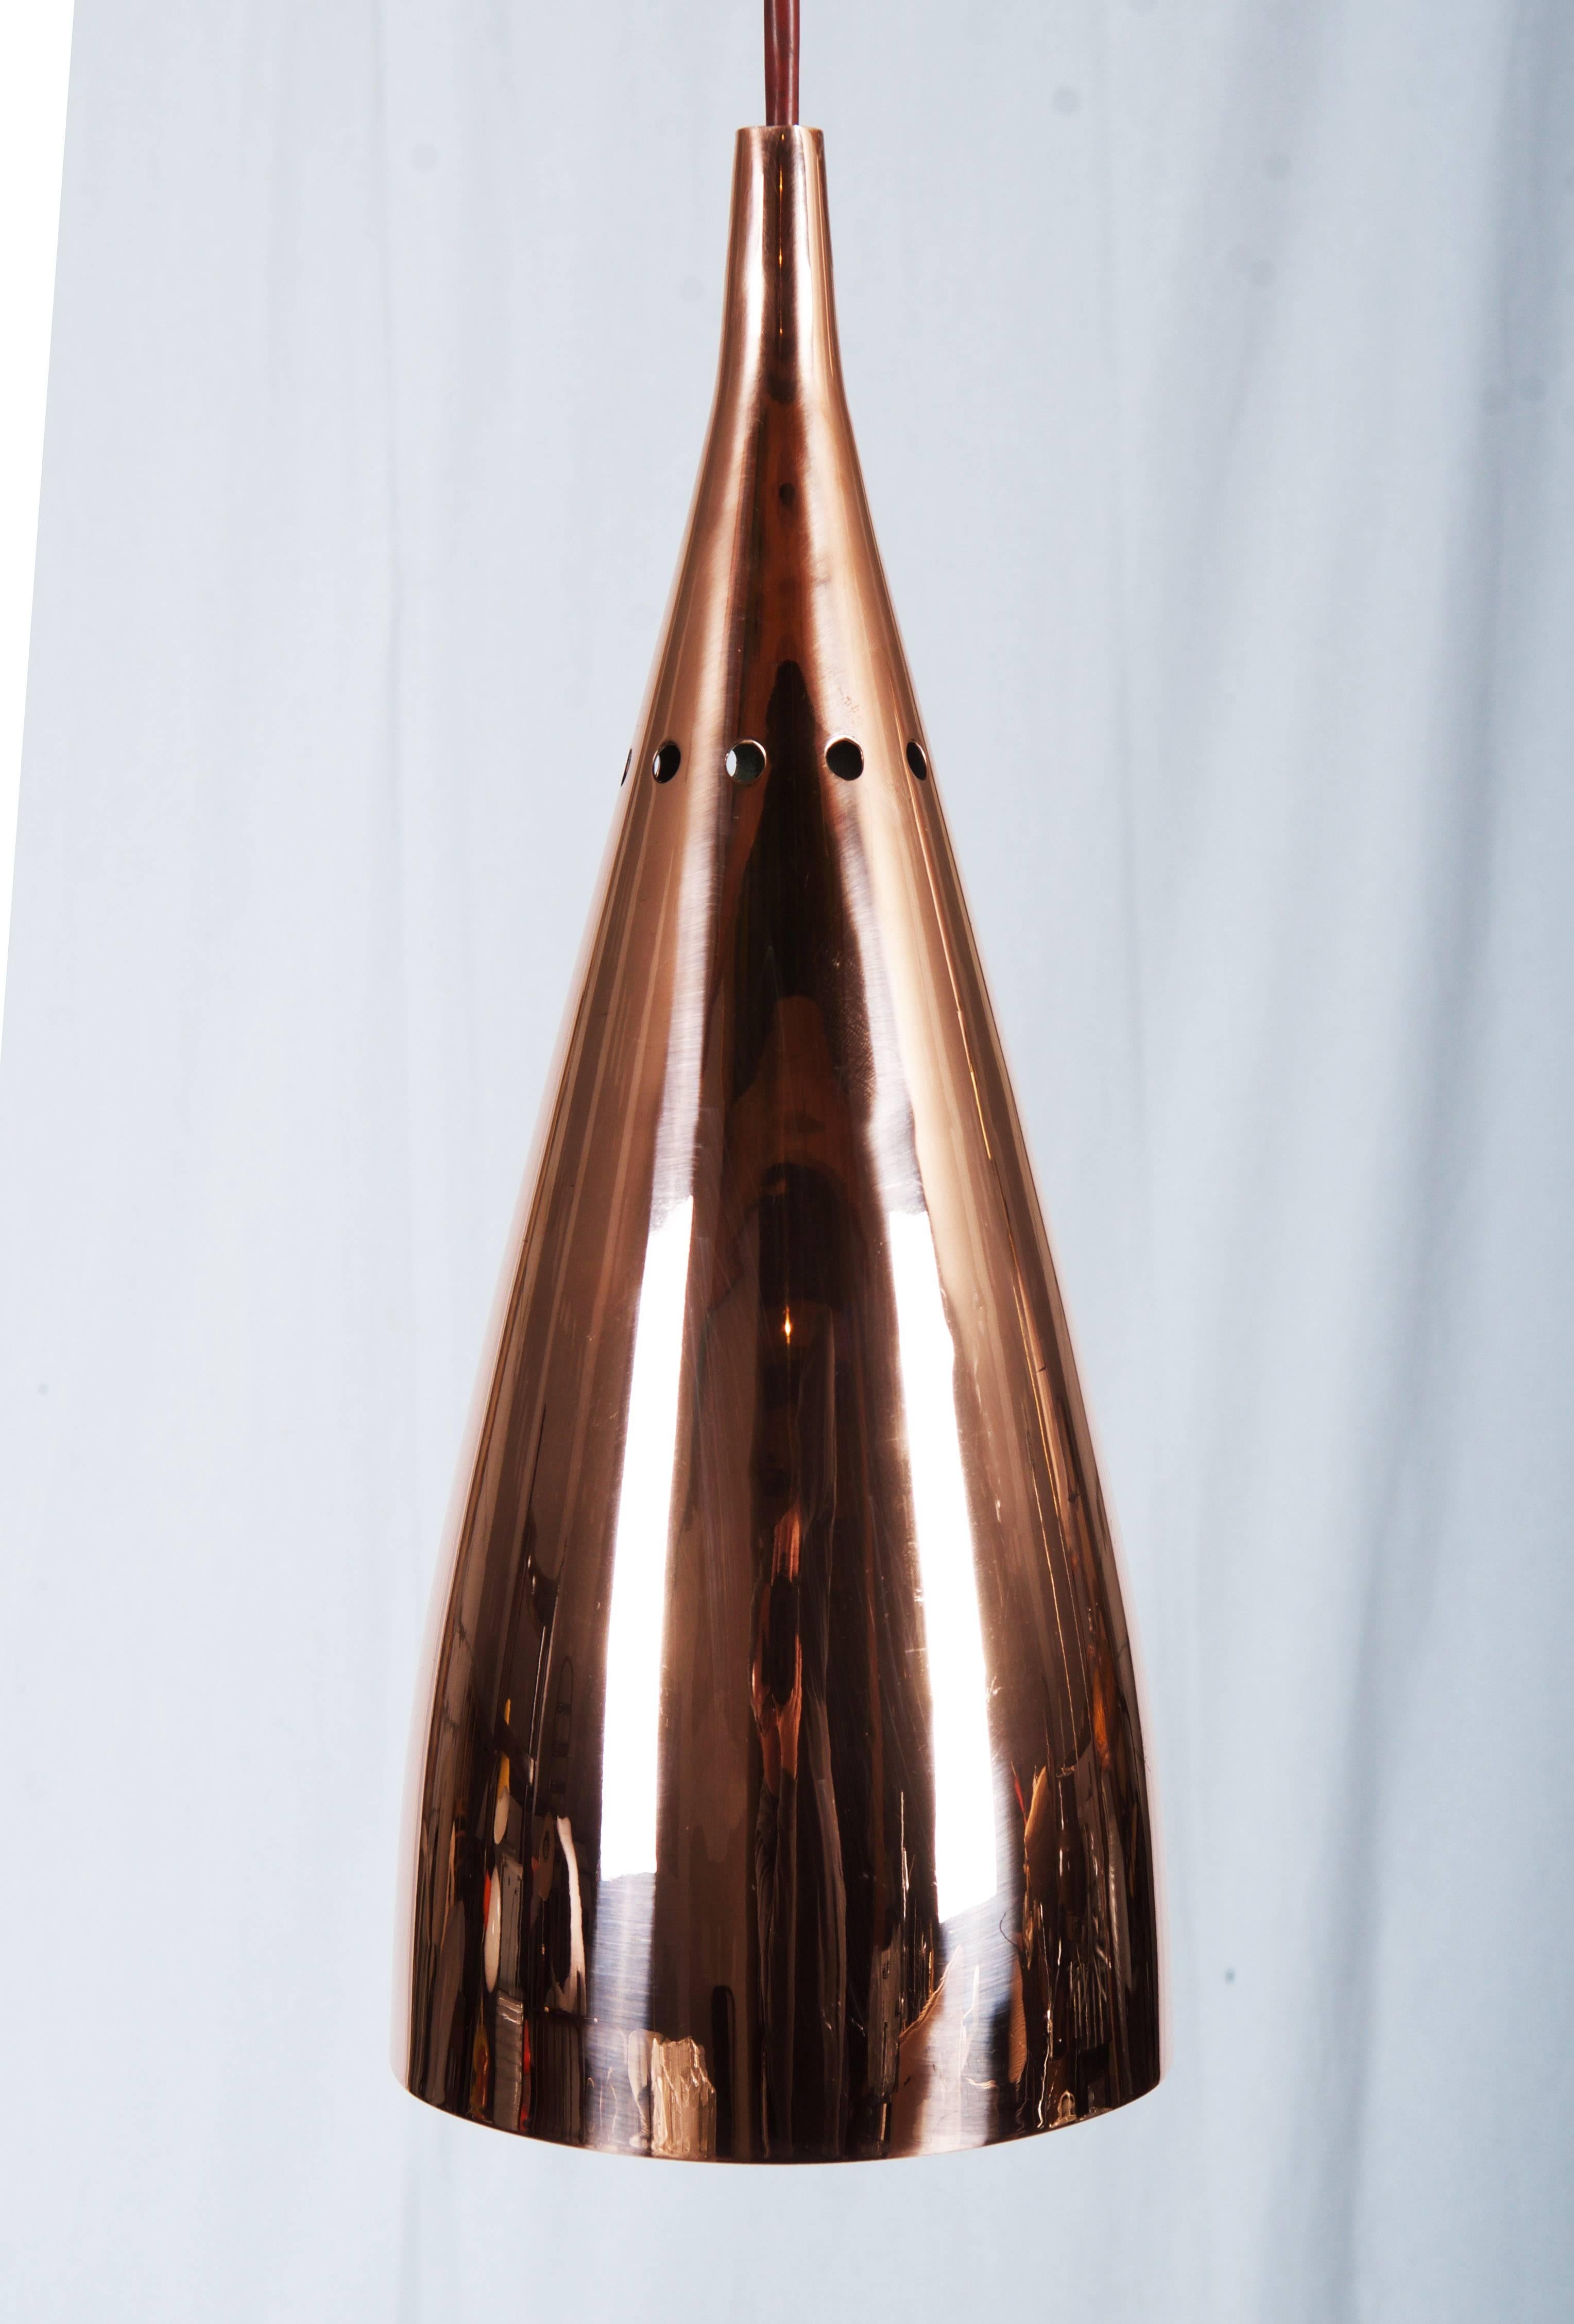 Copper polished bell-form fitted with one E27 socket, made by J.T. Kalmar in the early 1960s.
Perfect condition.
Up to three pieces available.
Dimension of the bell only: 15 x 36cm. (5.9x14.17